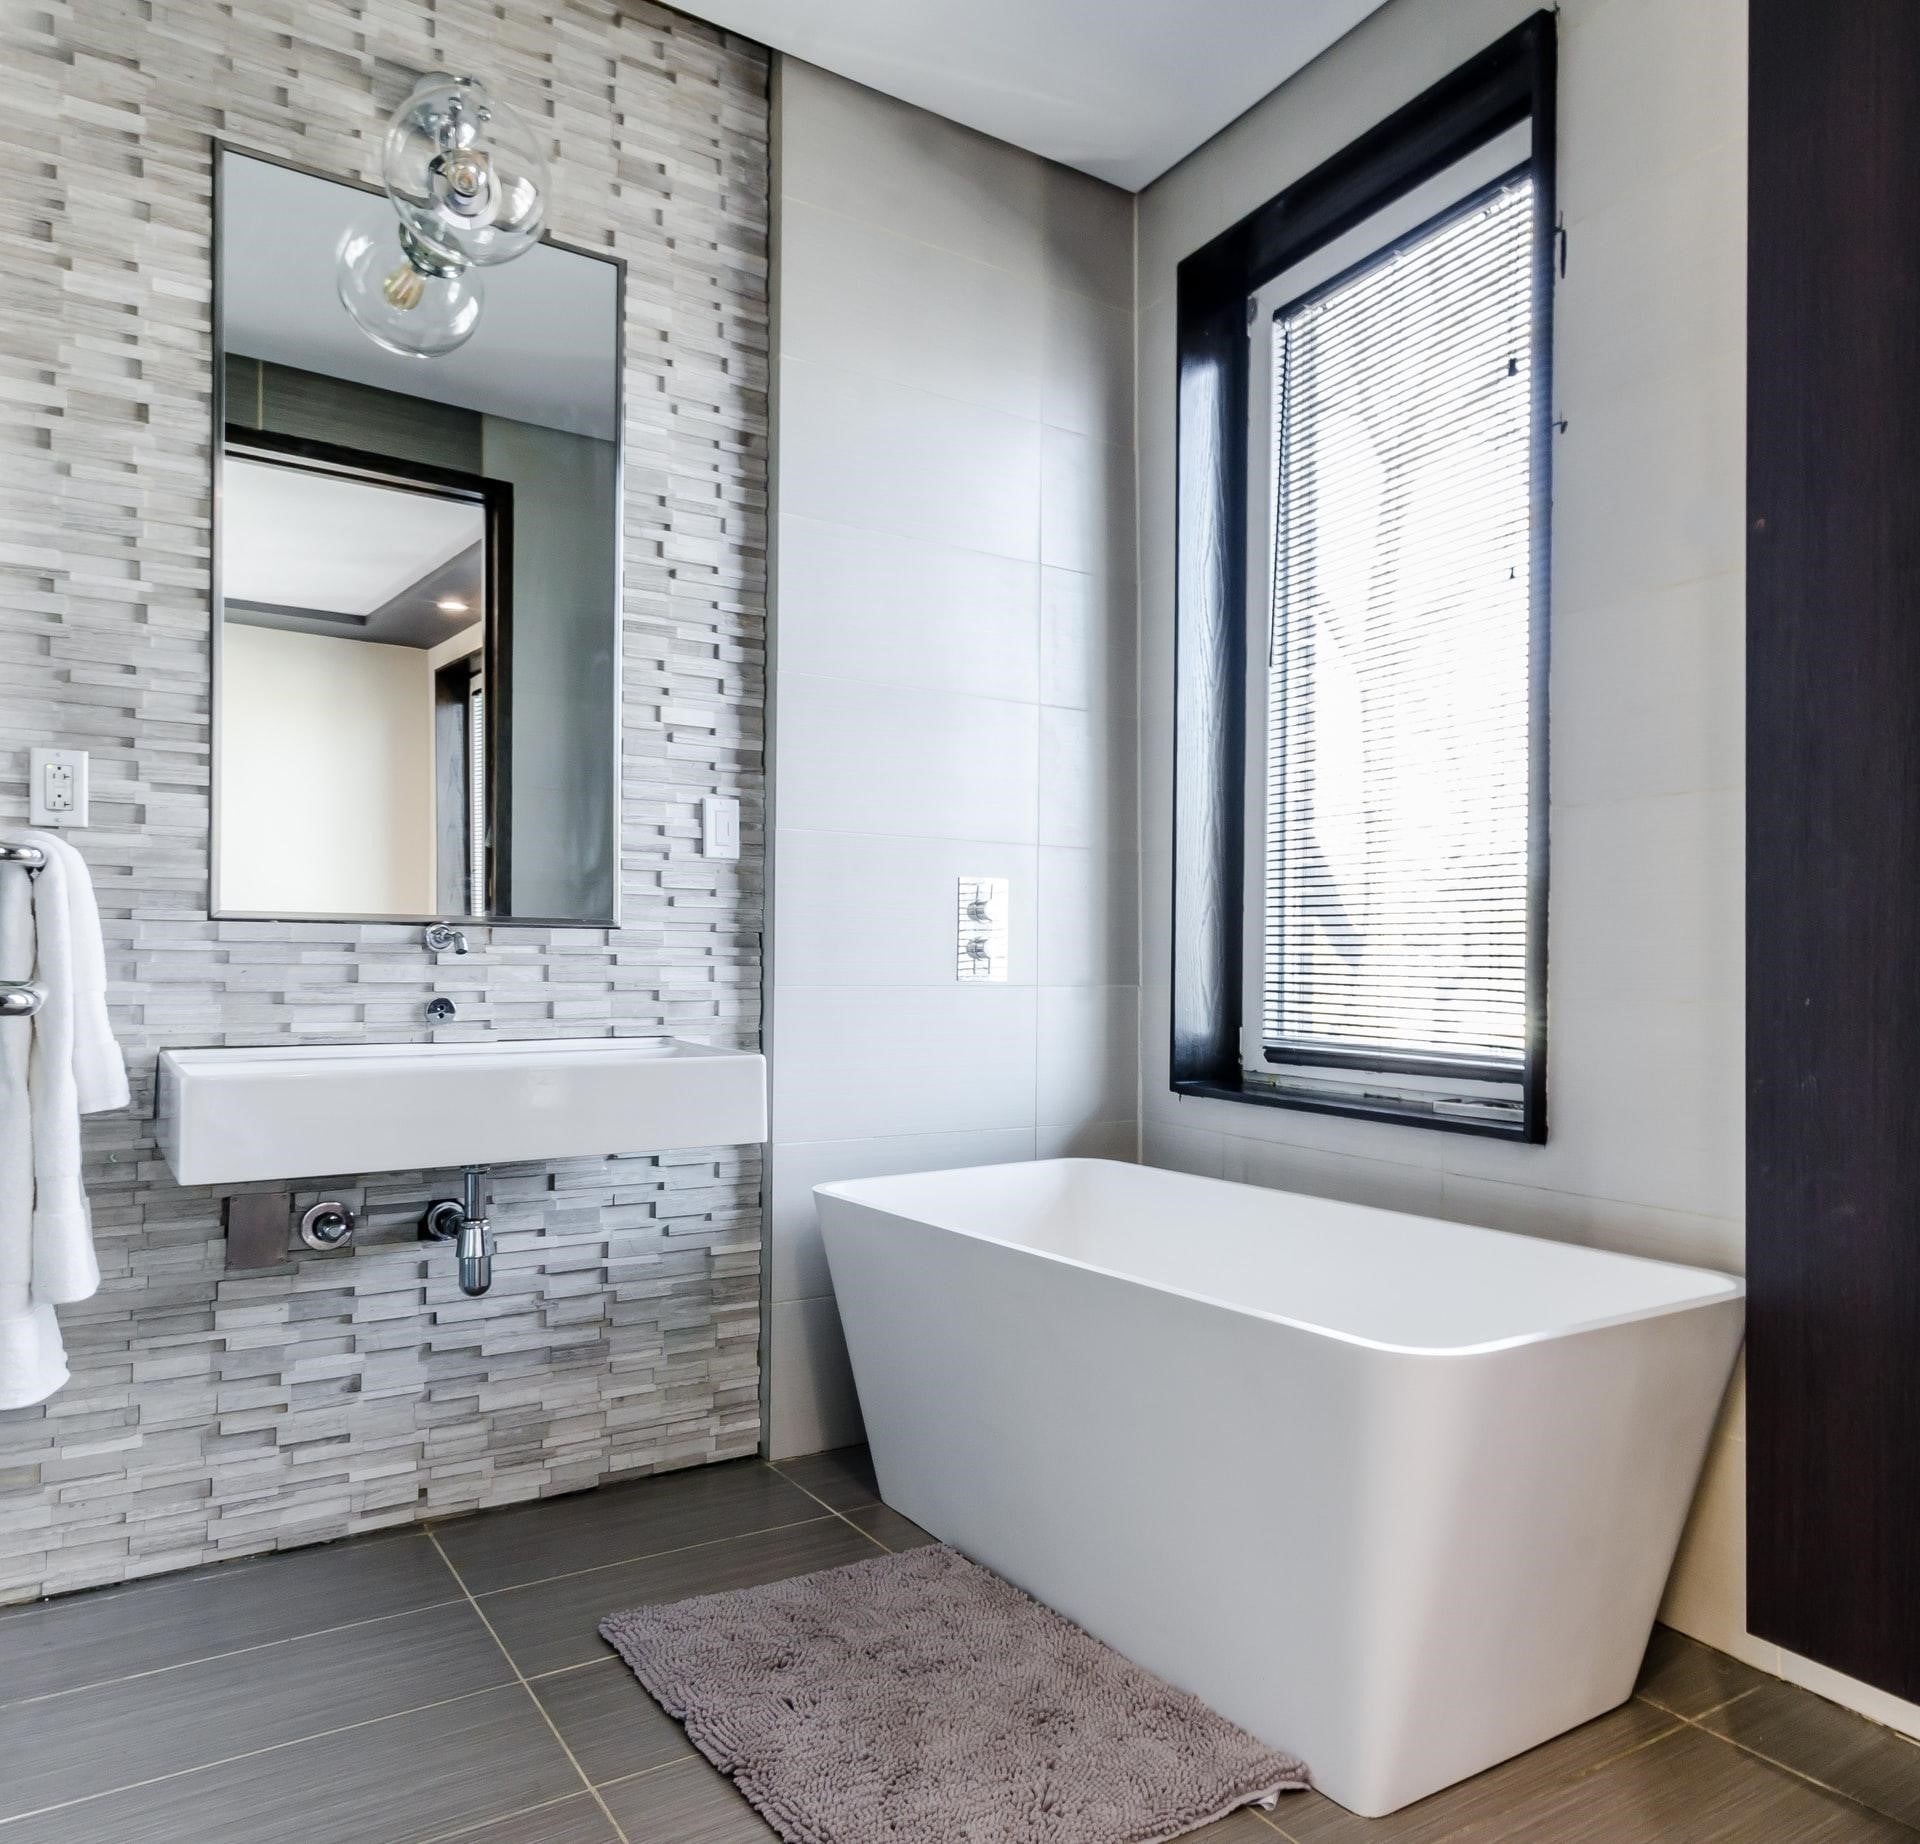 a modern bathroom with tiling and a large window